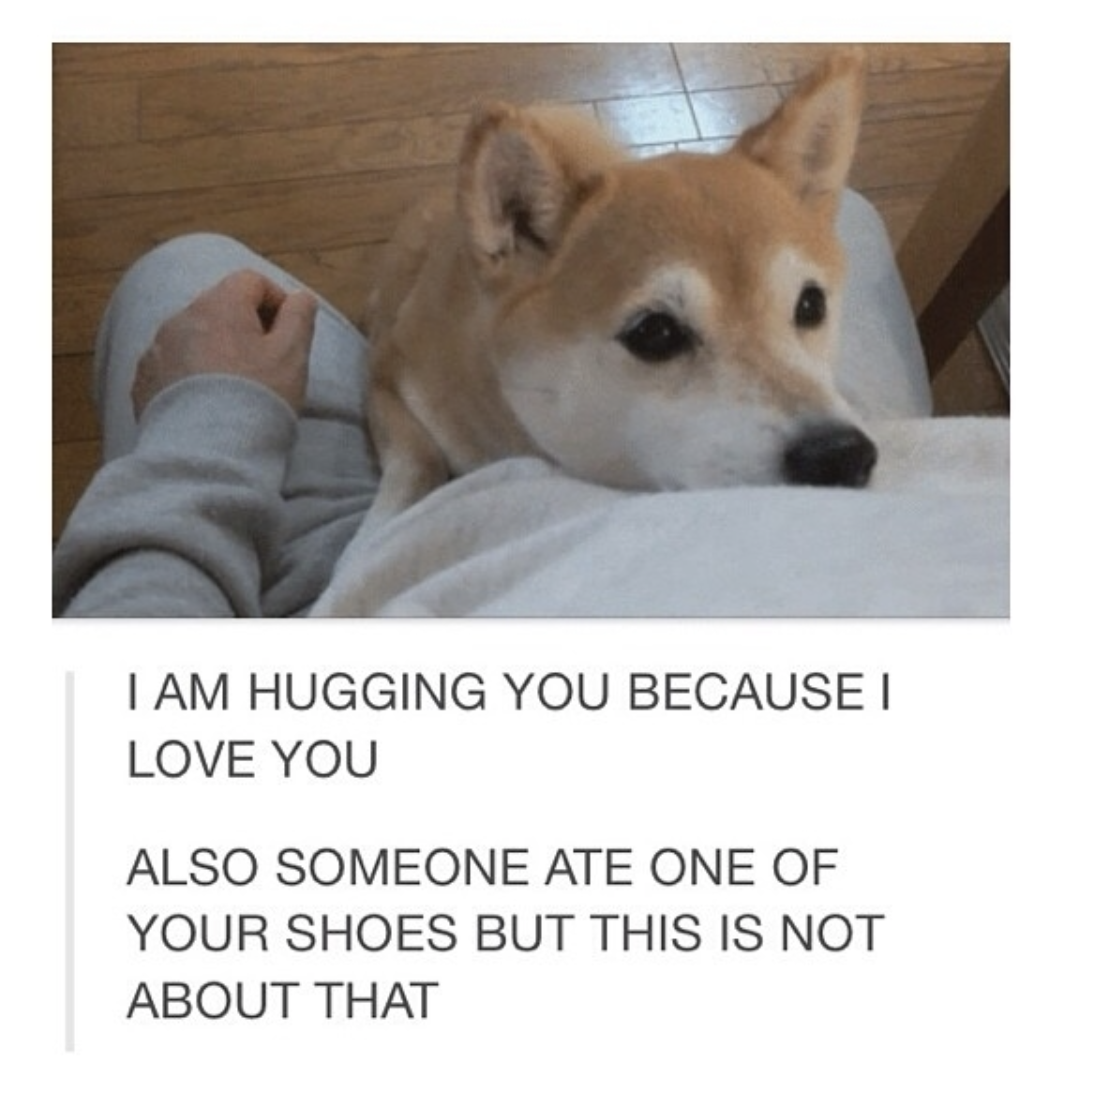 shiba tail wag - I Am Hugging You Because I Love You Also Someone Ate One Of Your Shoes But This Is Not About That